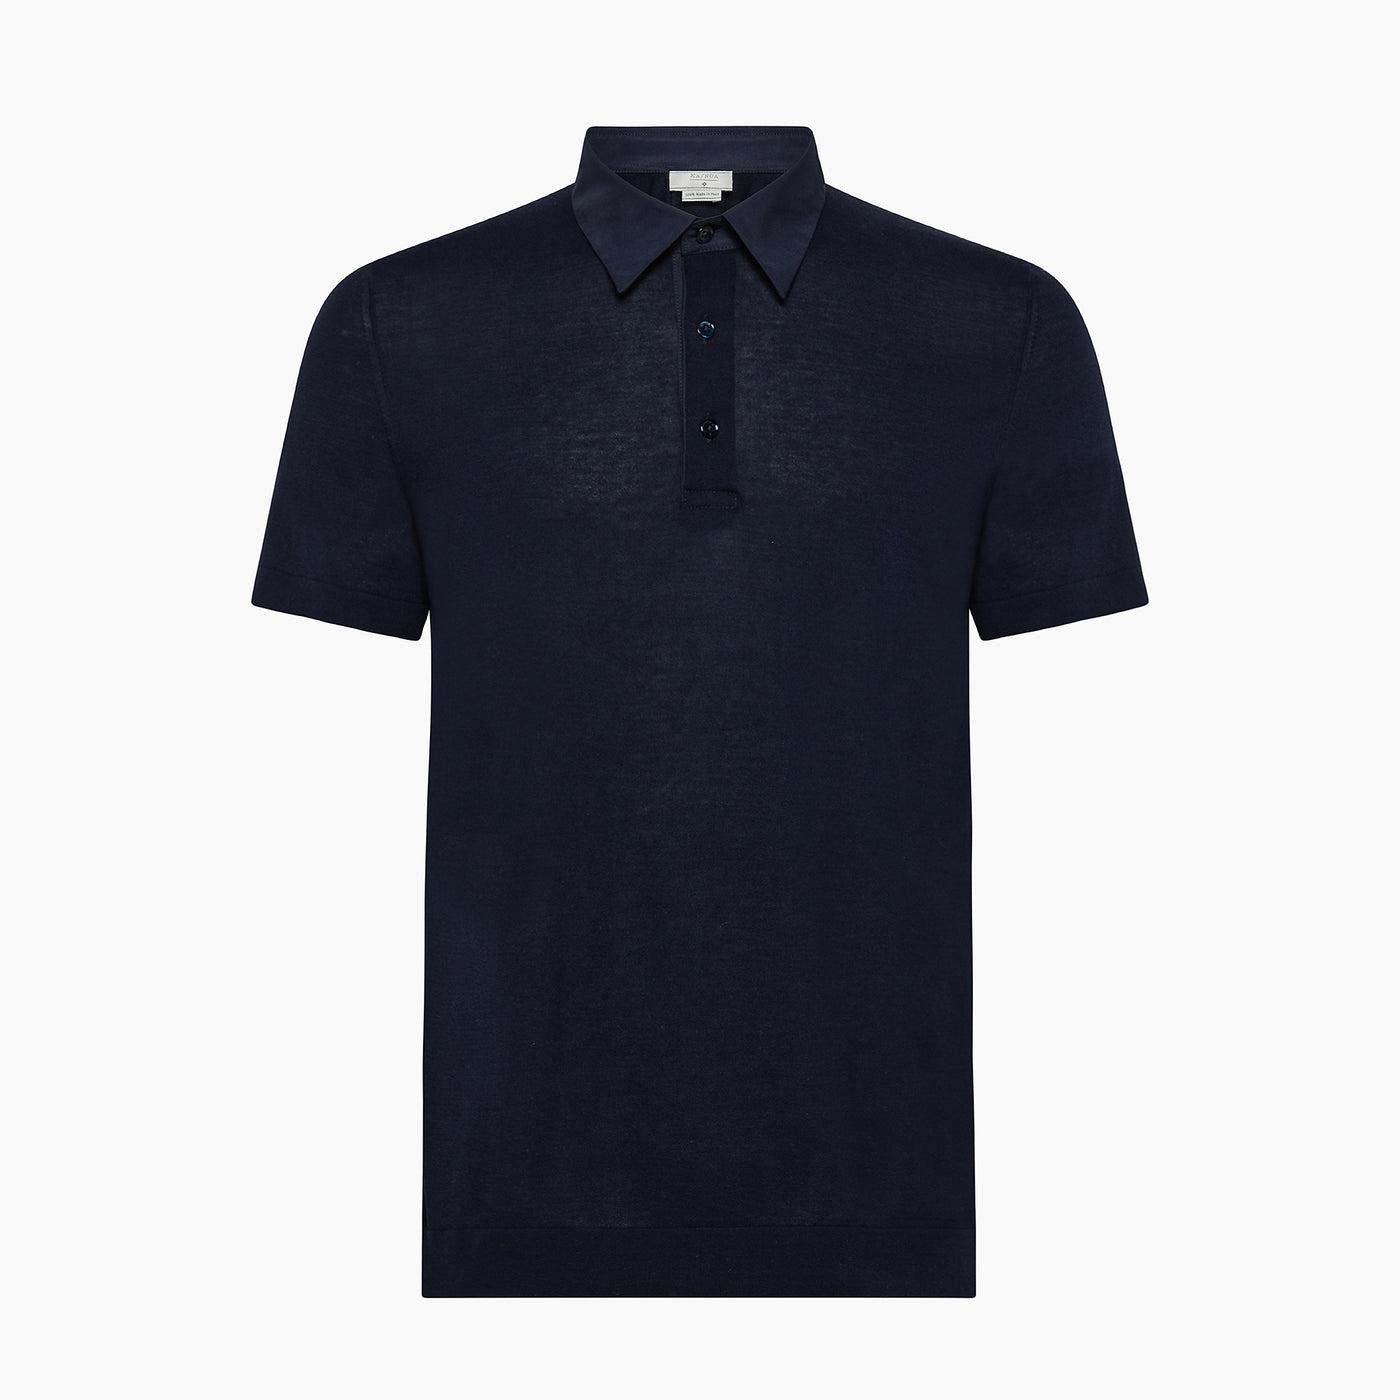 Matteo short-sleeved knitted polo with shirt popeline collar (Cotton)